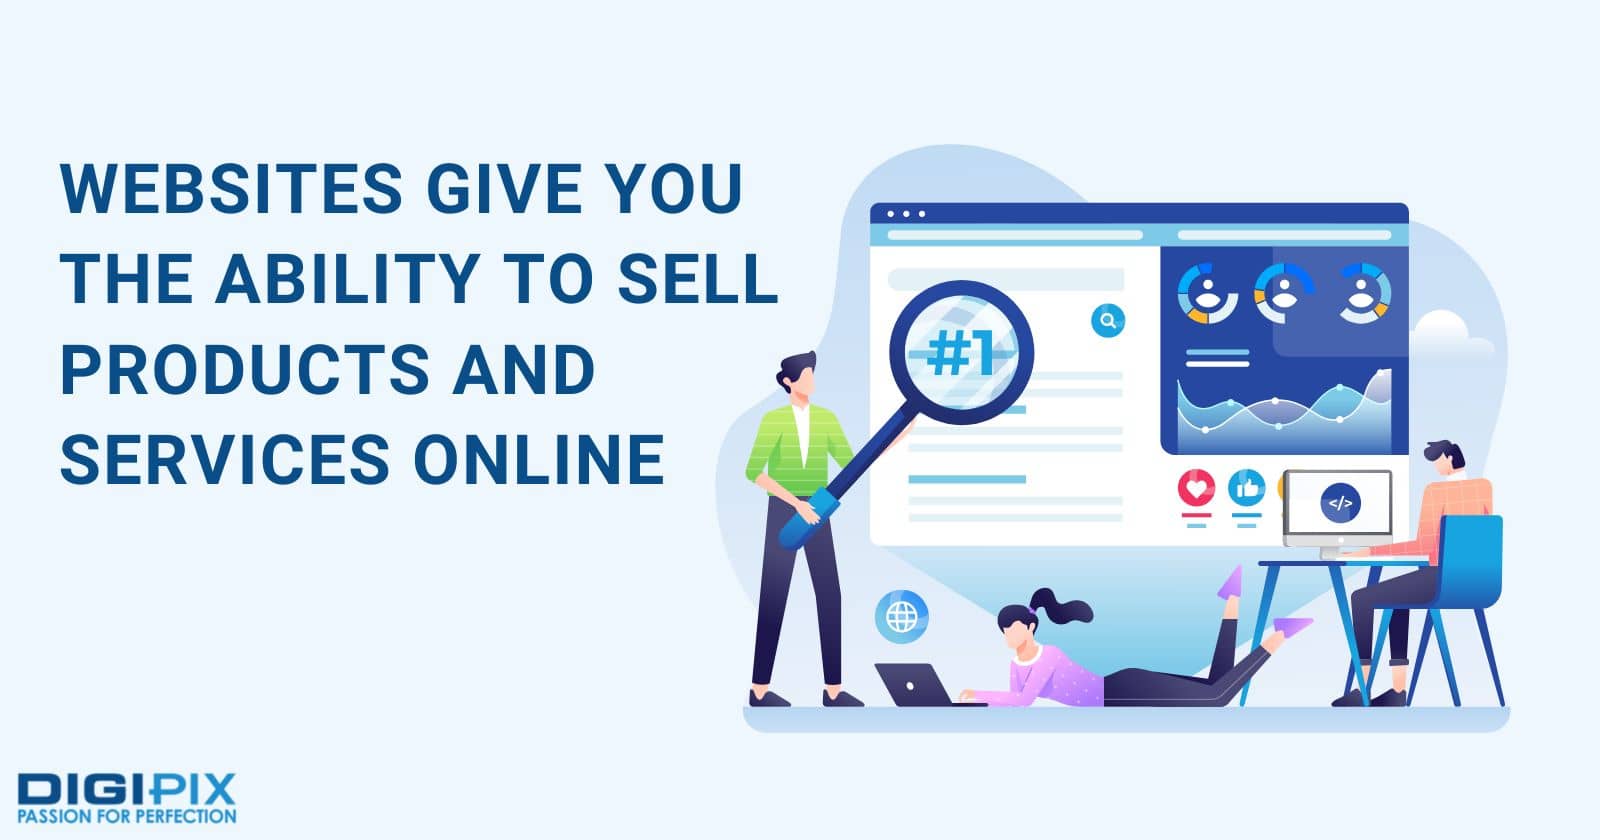 Websites give you the ability to sell products and services online digipix digipixinc.com